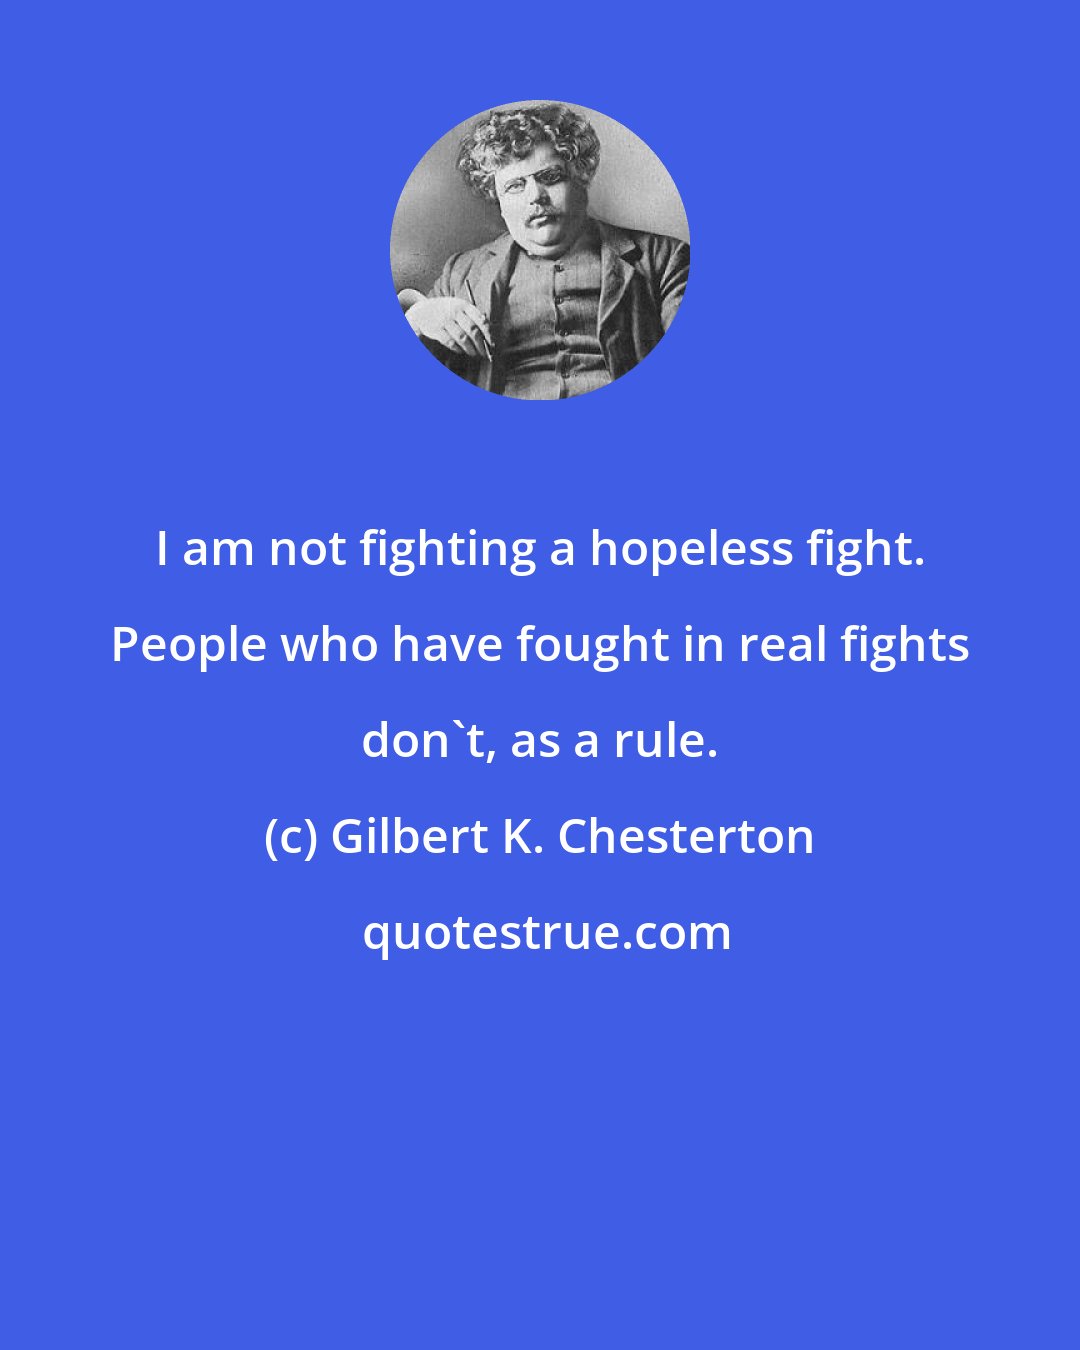 Gilbert K. Chesterton: I am not fighting a hopeless fight. People who have fought in real fights don't, as a rule.